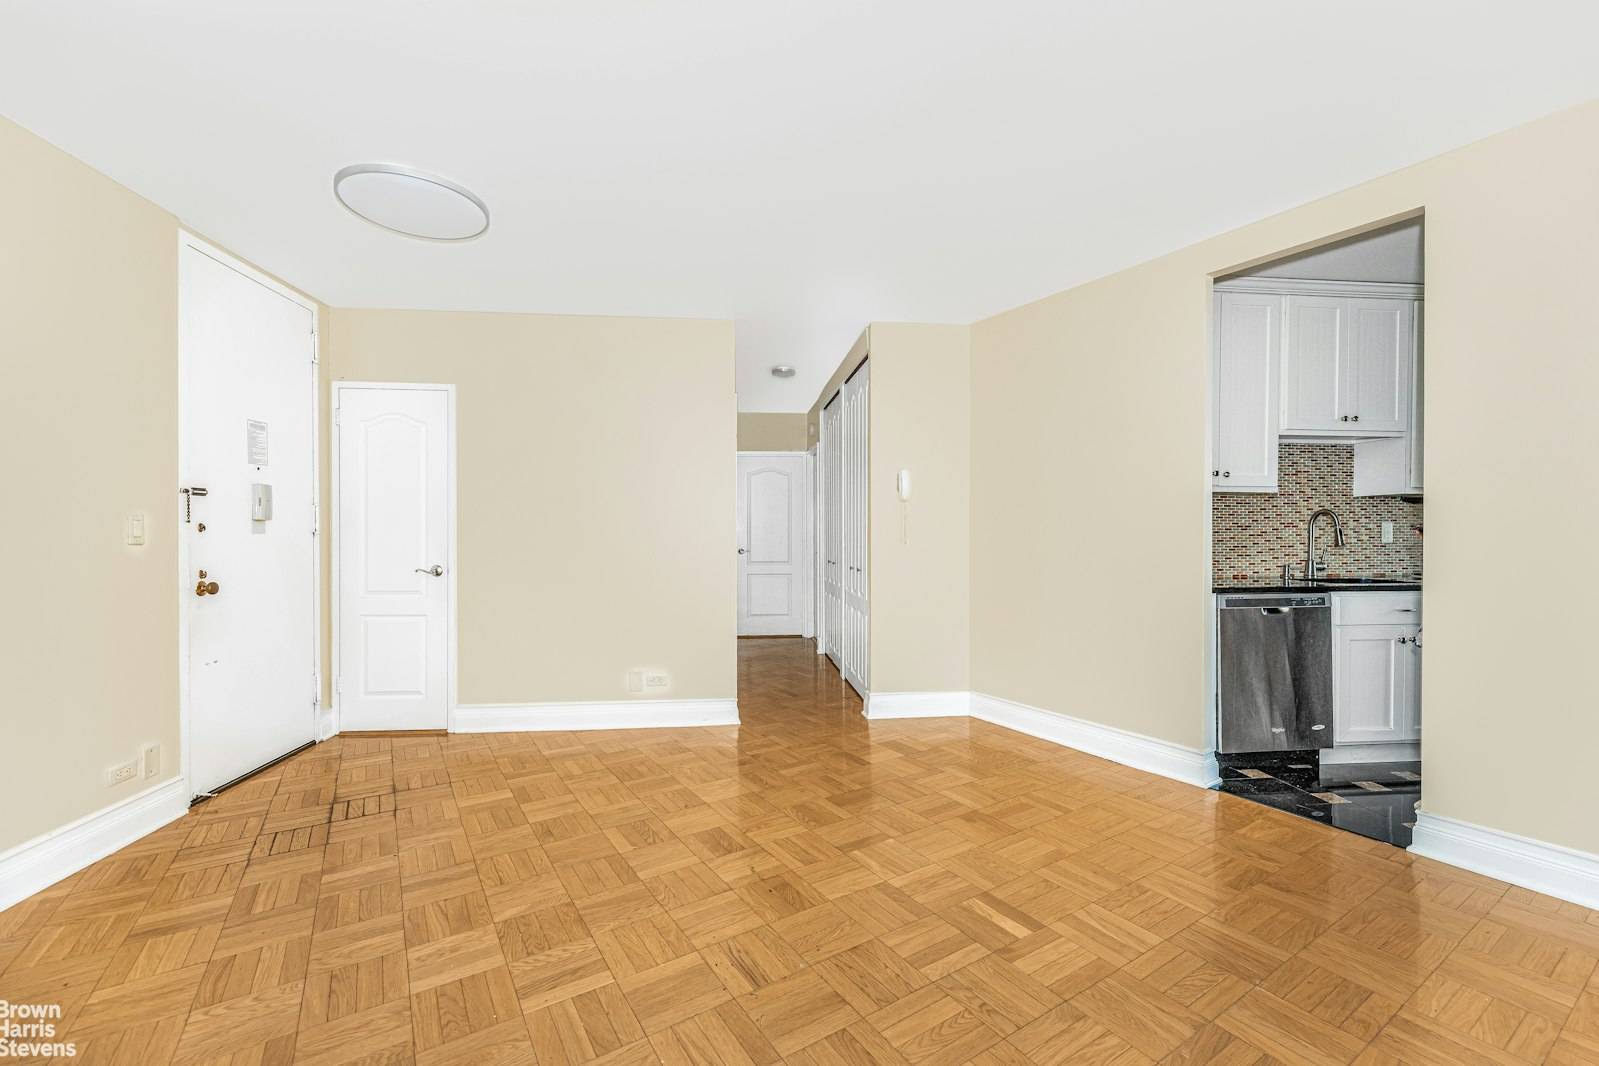 Welcome home to this spacious 2 bed, 2.